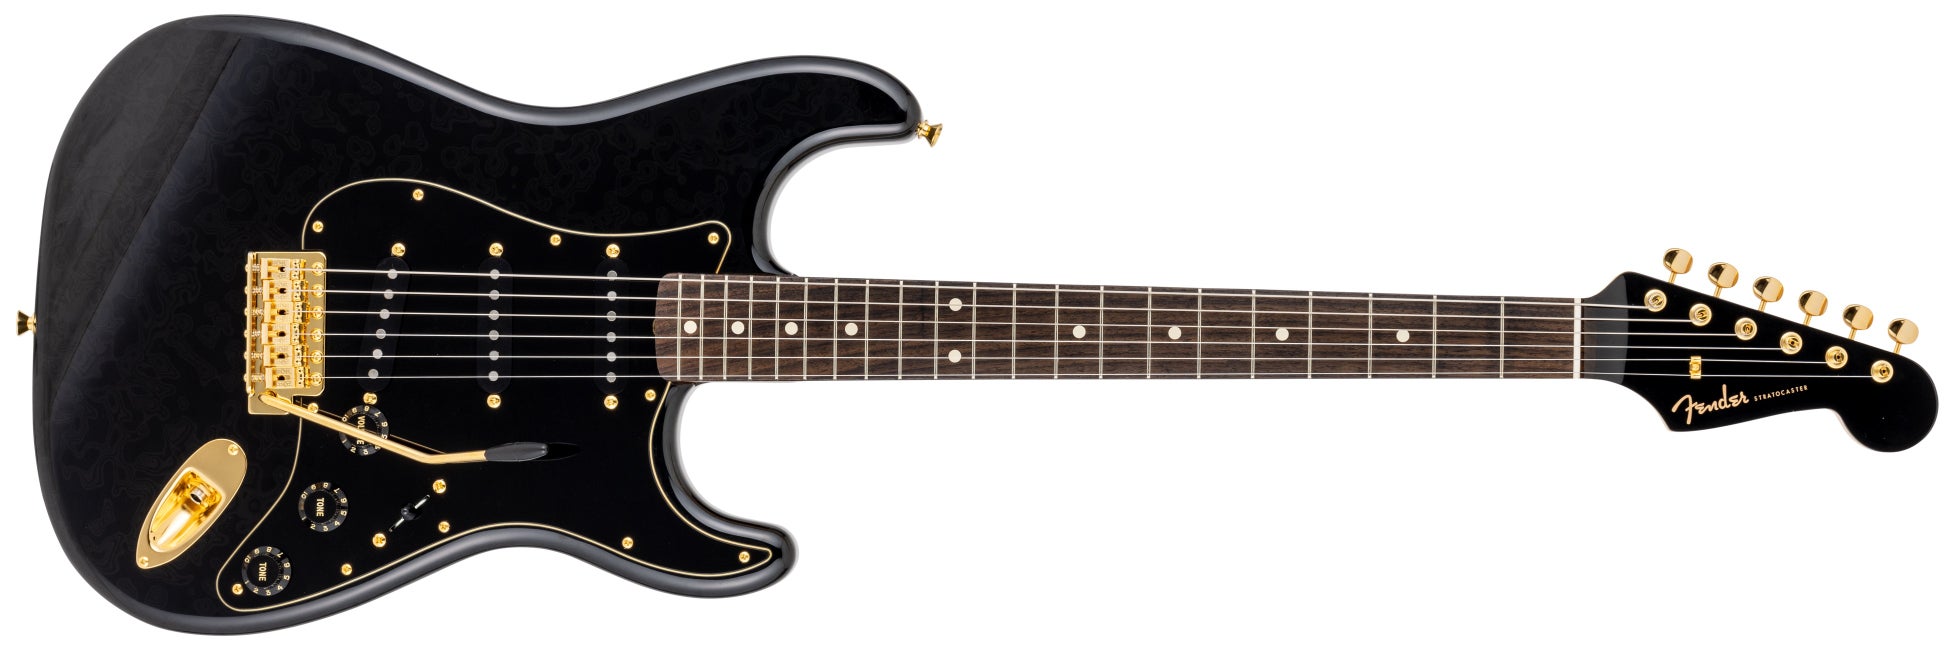 Fender Flagship Tokyo 1周年記念モデル 二次抽選販売のご案内